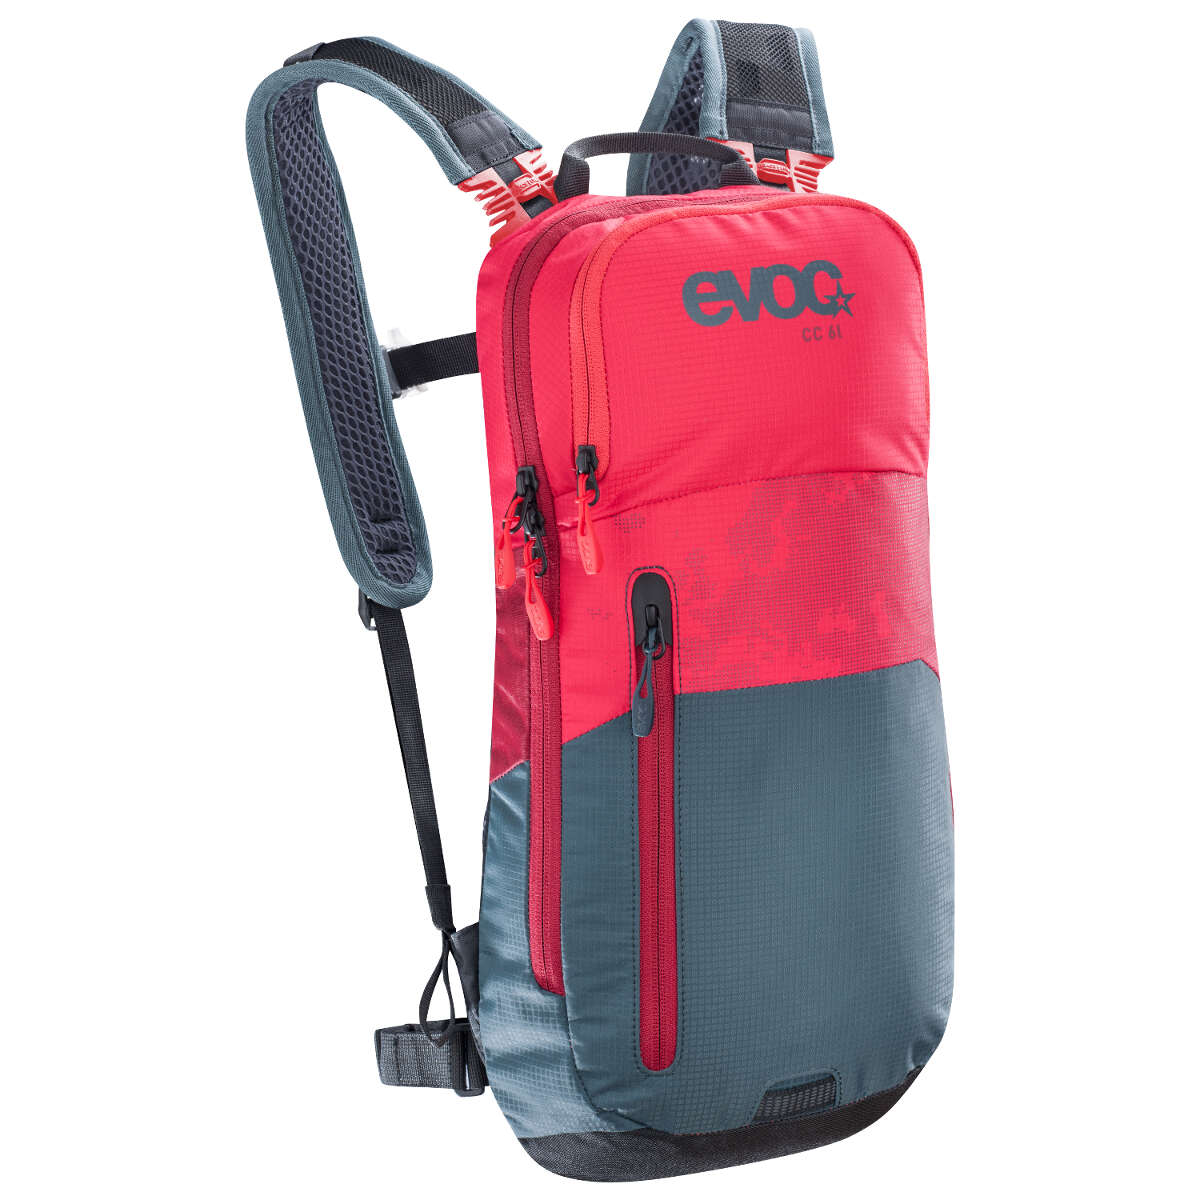 Evoc Backpack with Hydration System Compartment Cross Country Red Slate ...